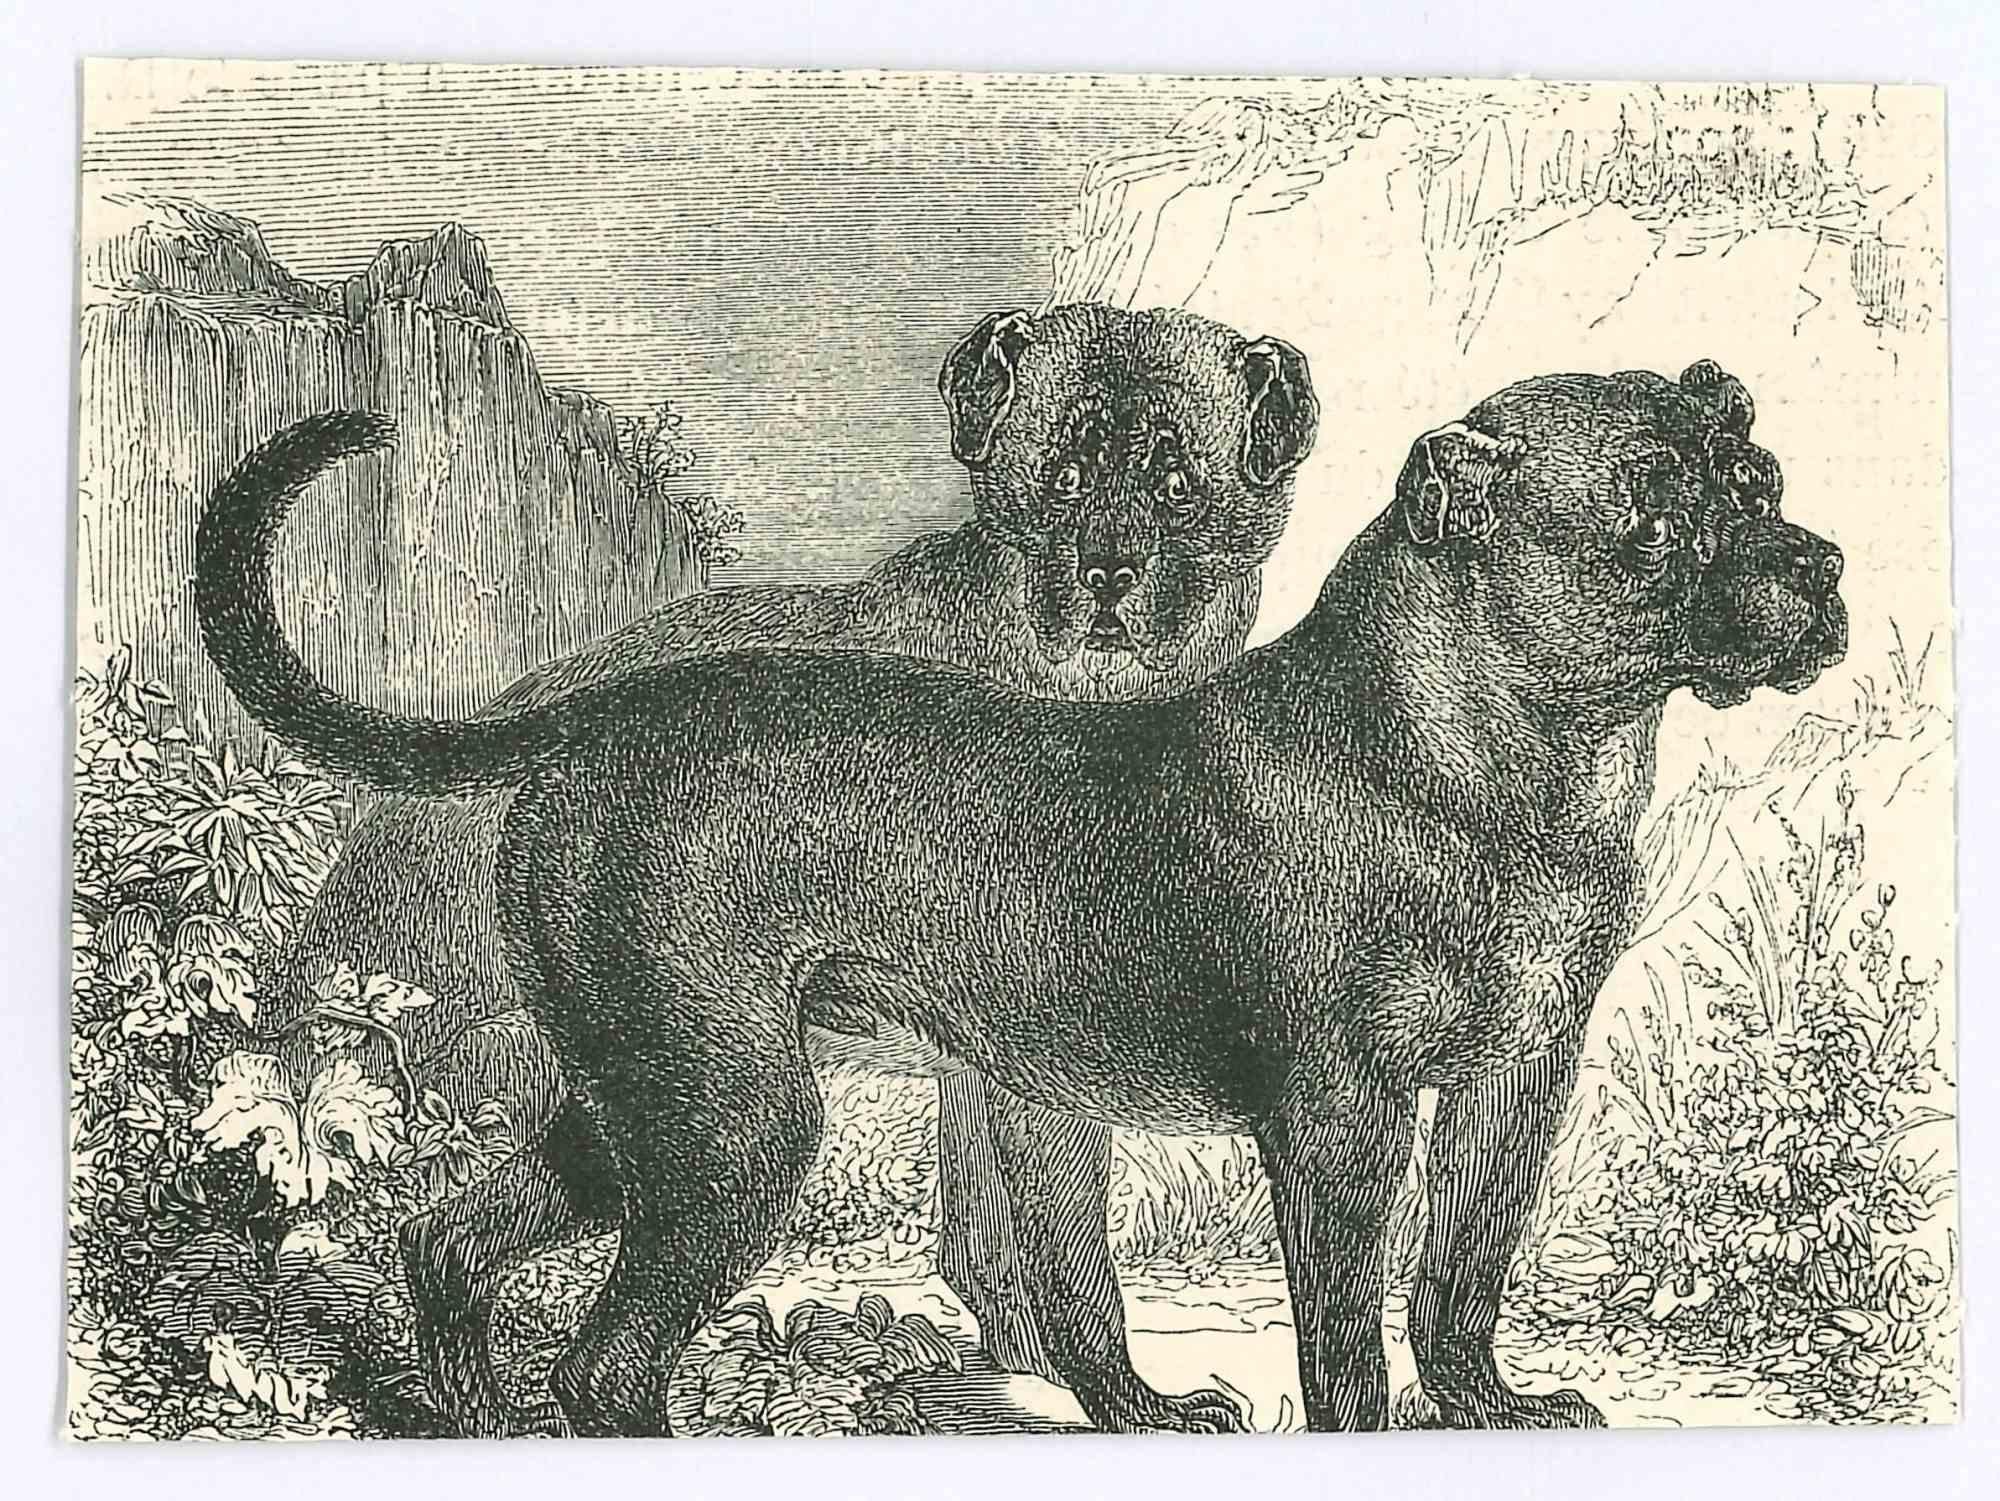 The Dogs - Original Lithograph by Paul Gervais - 1854